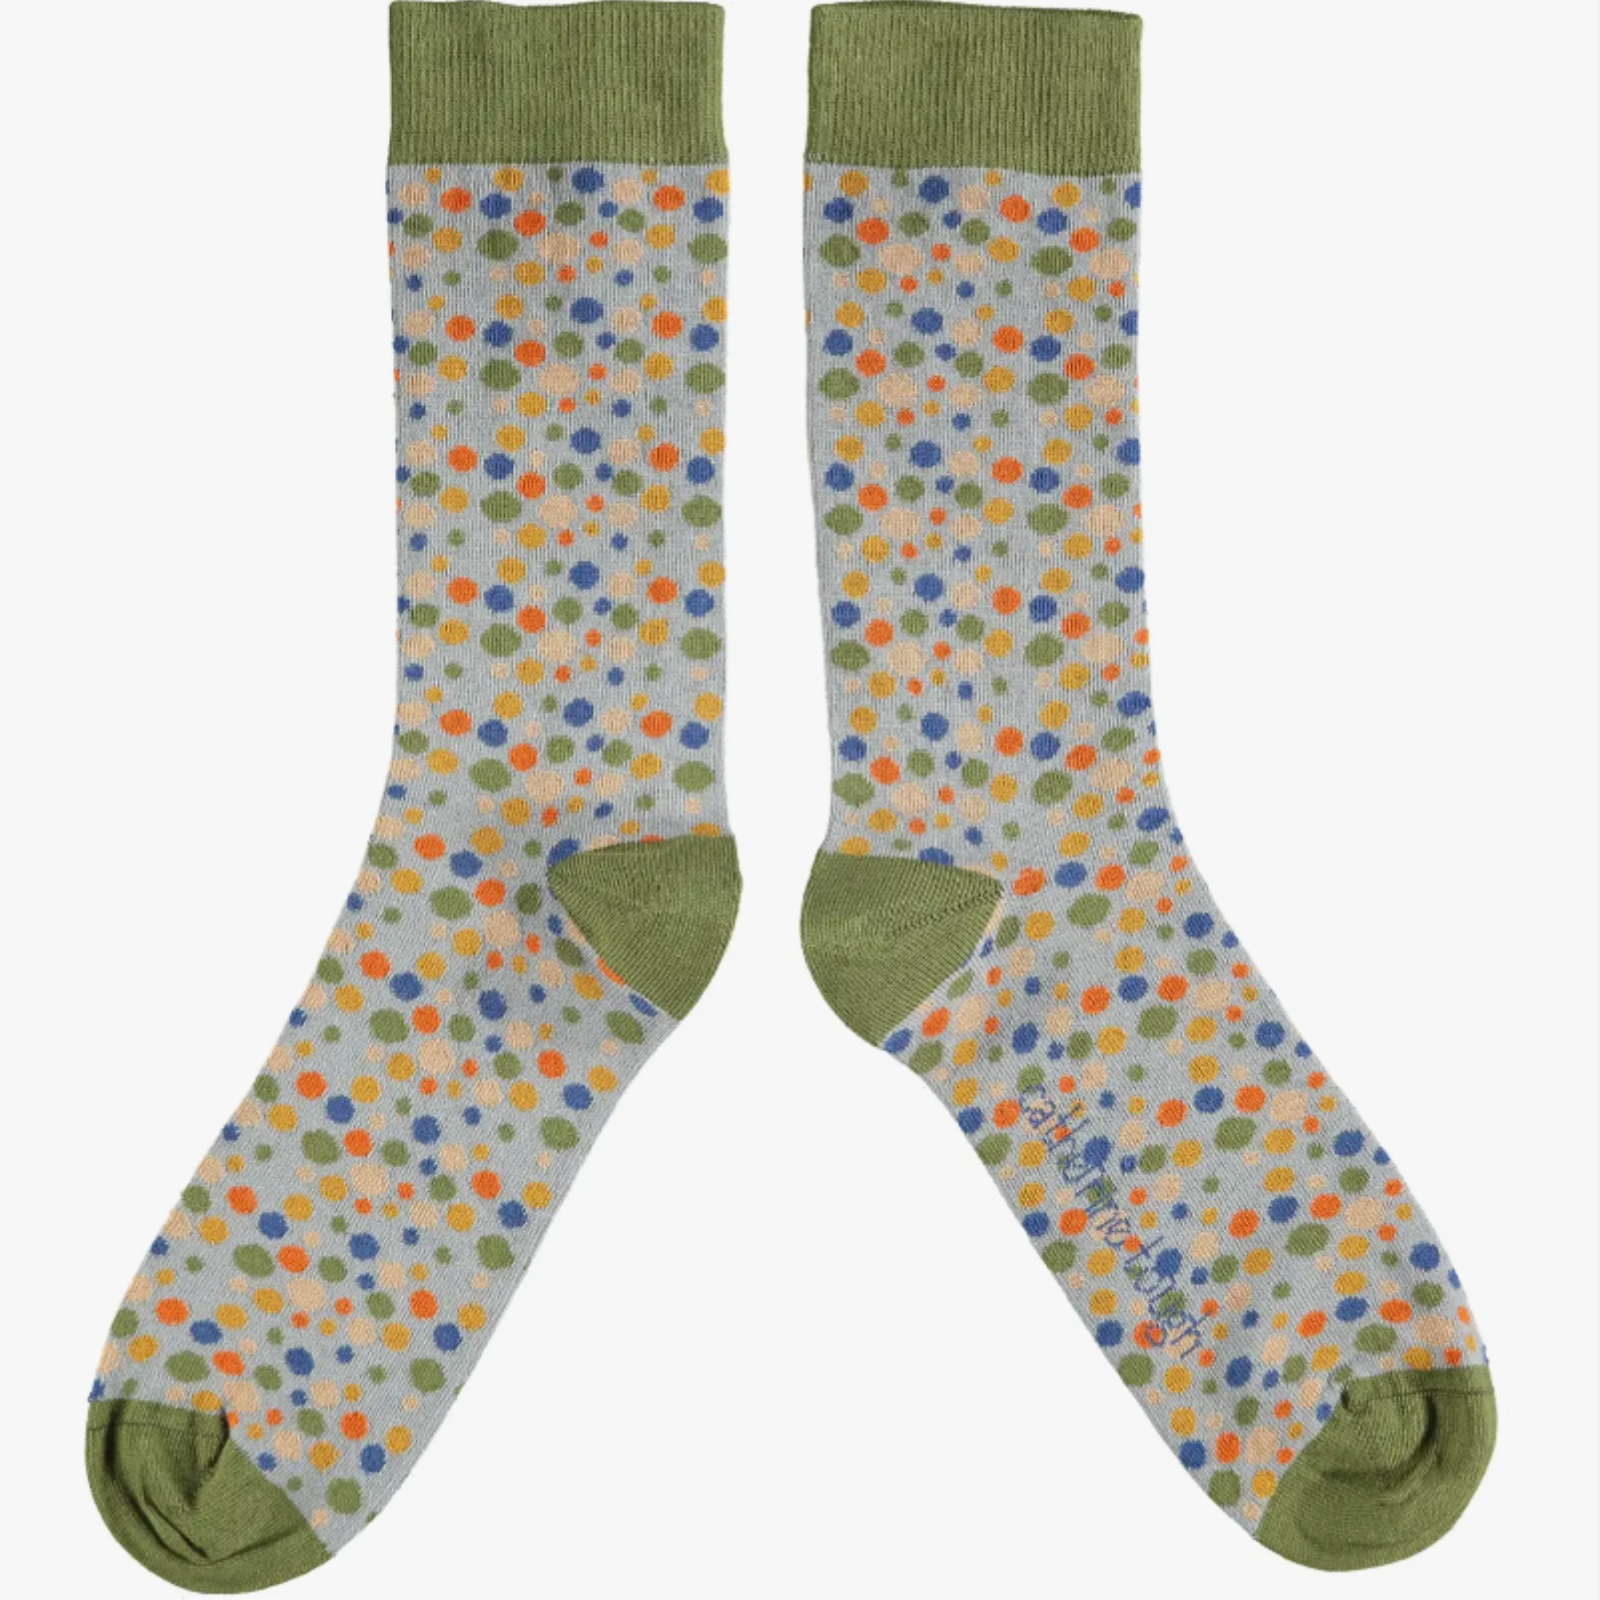 Catherine Tough men's polka dot sock design features multi-colored polka dots on a gray base framed with olive cuffs, heels & toes.